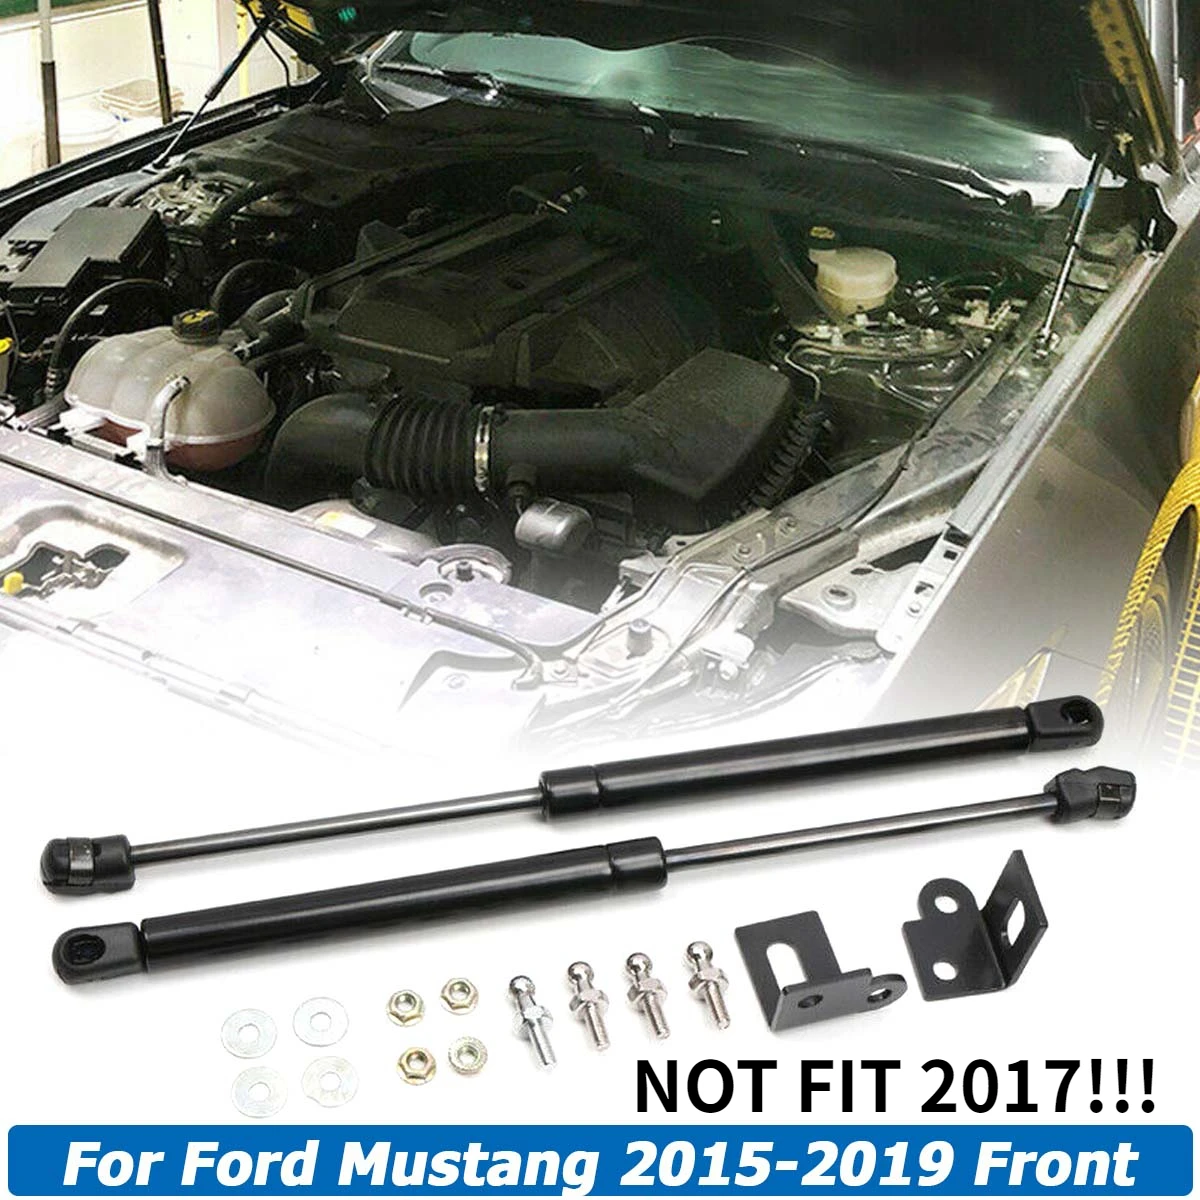 For Ford Mustang 2015-2020 NOT 2017 Front Engine Hood Bonnet Shock Lift Struts Support Props Gas Spring Bracket Car Accessories